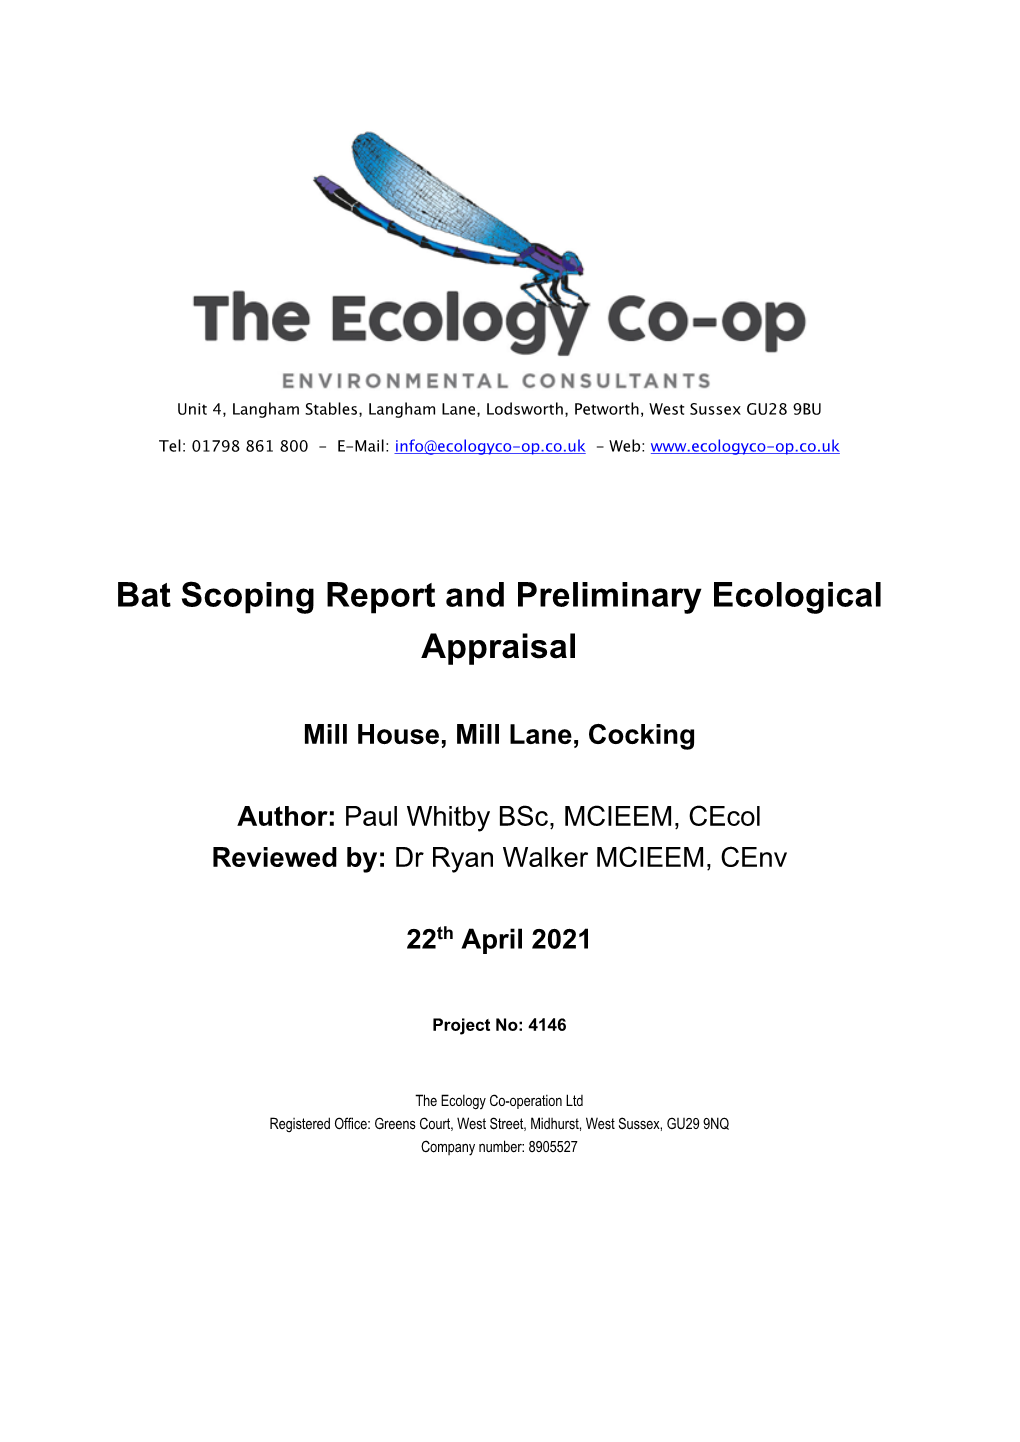 Bat Scoping Report and Preliminary Ecological Appraisal